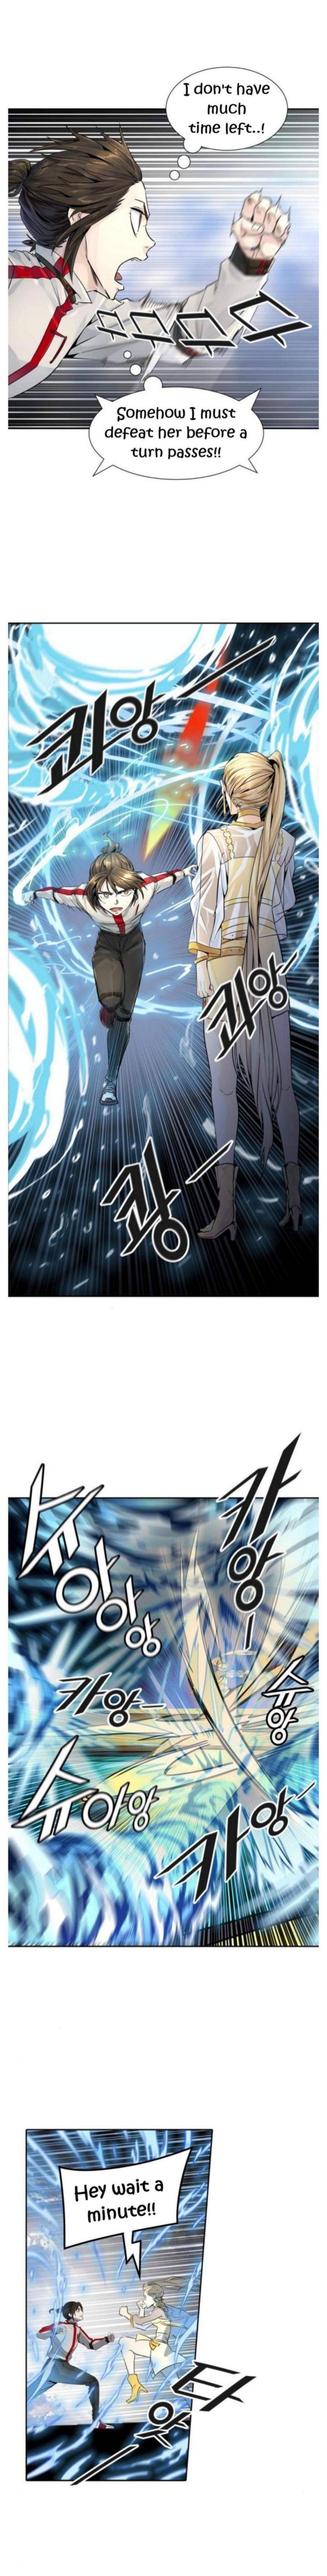 Tower Of God 495 24